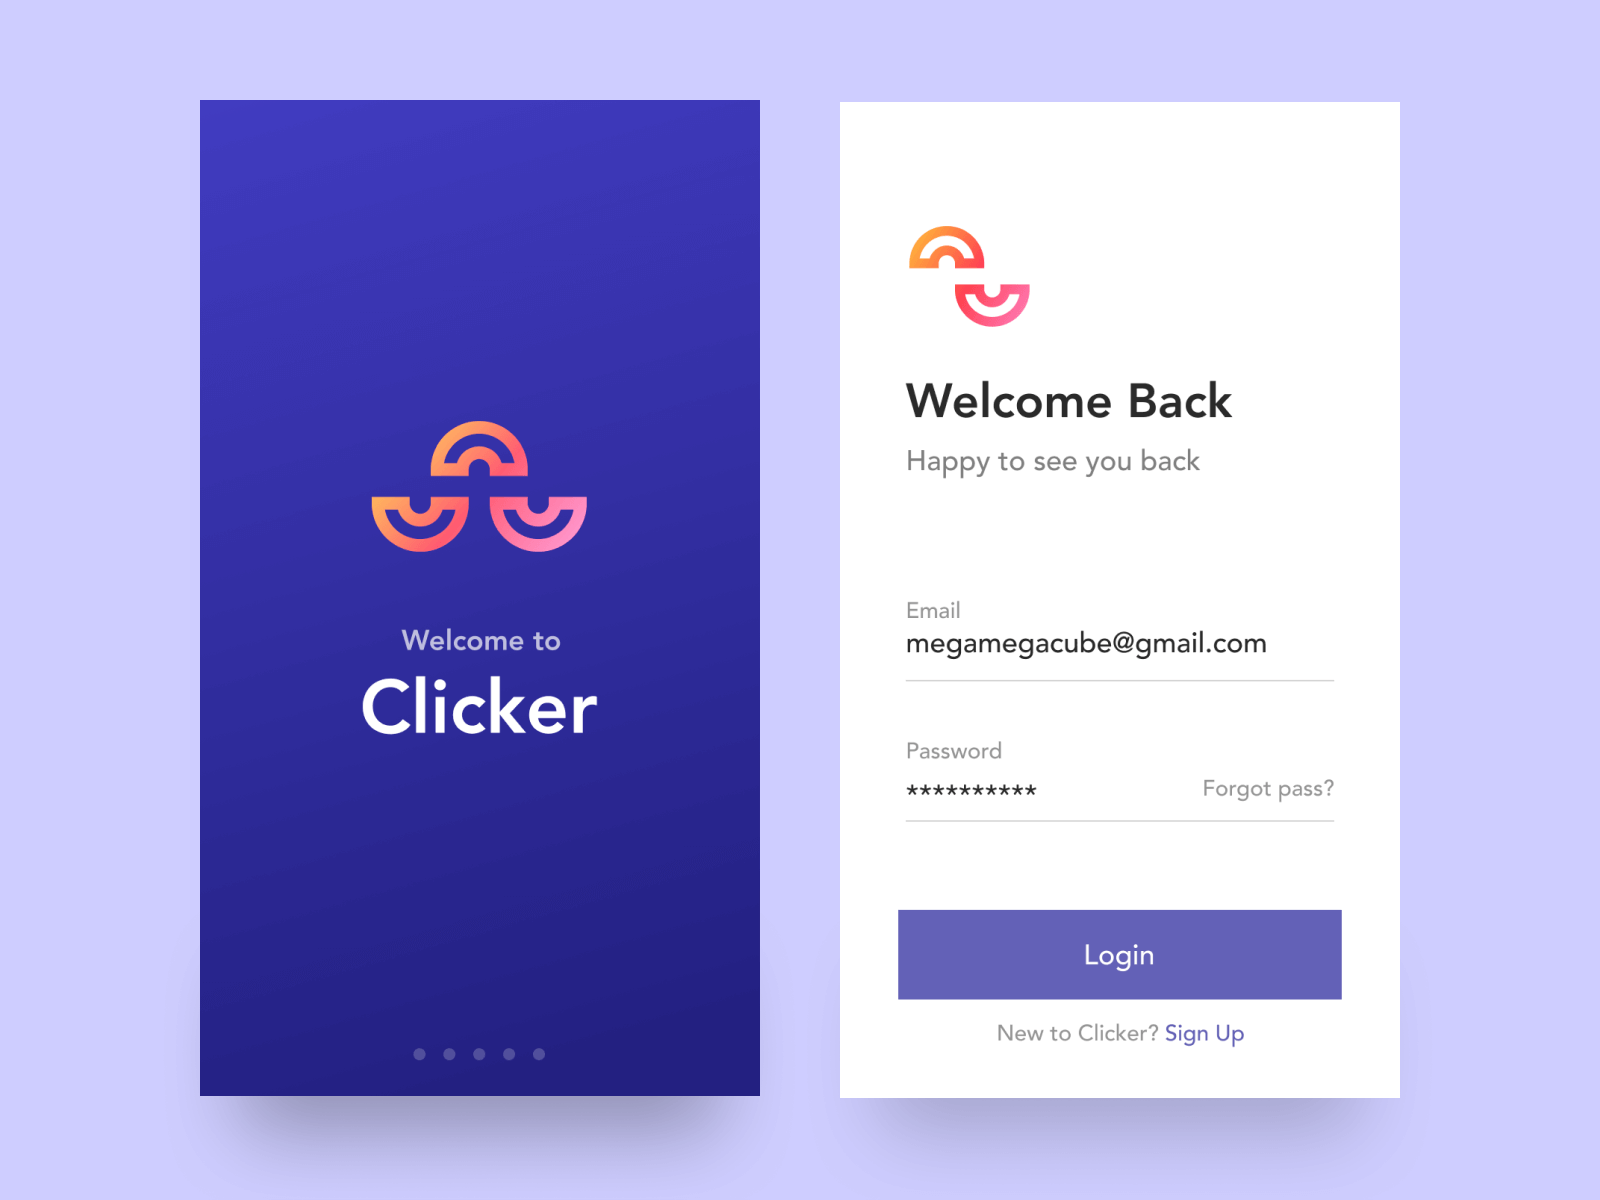 Clicker Mobile Application by Victor Vorontsov on Dribbble